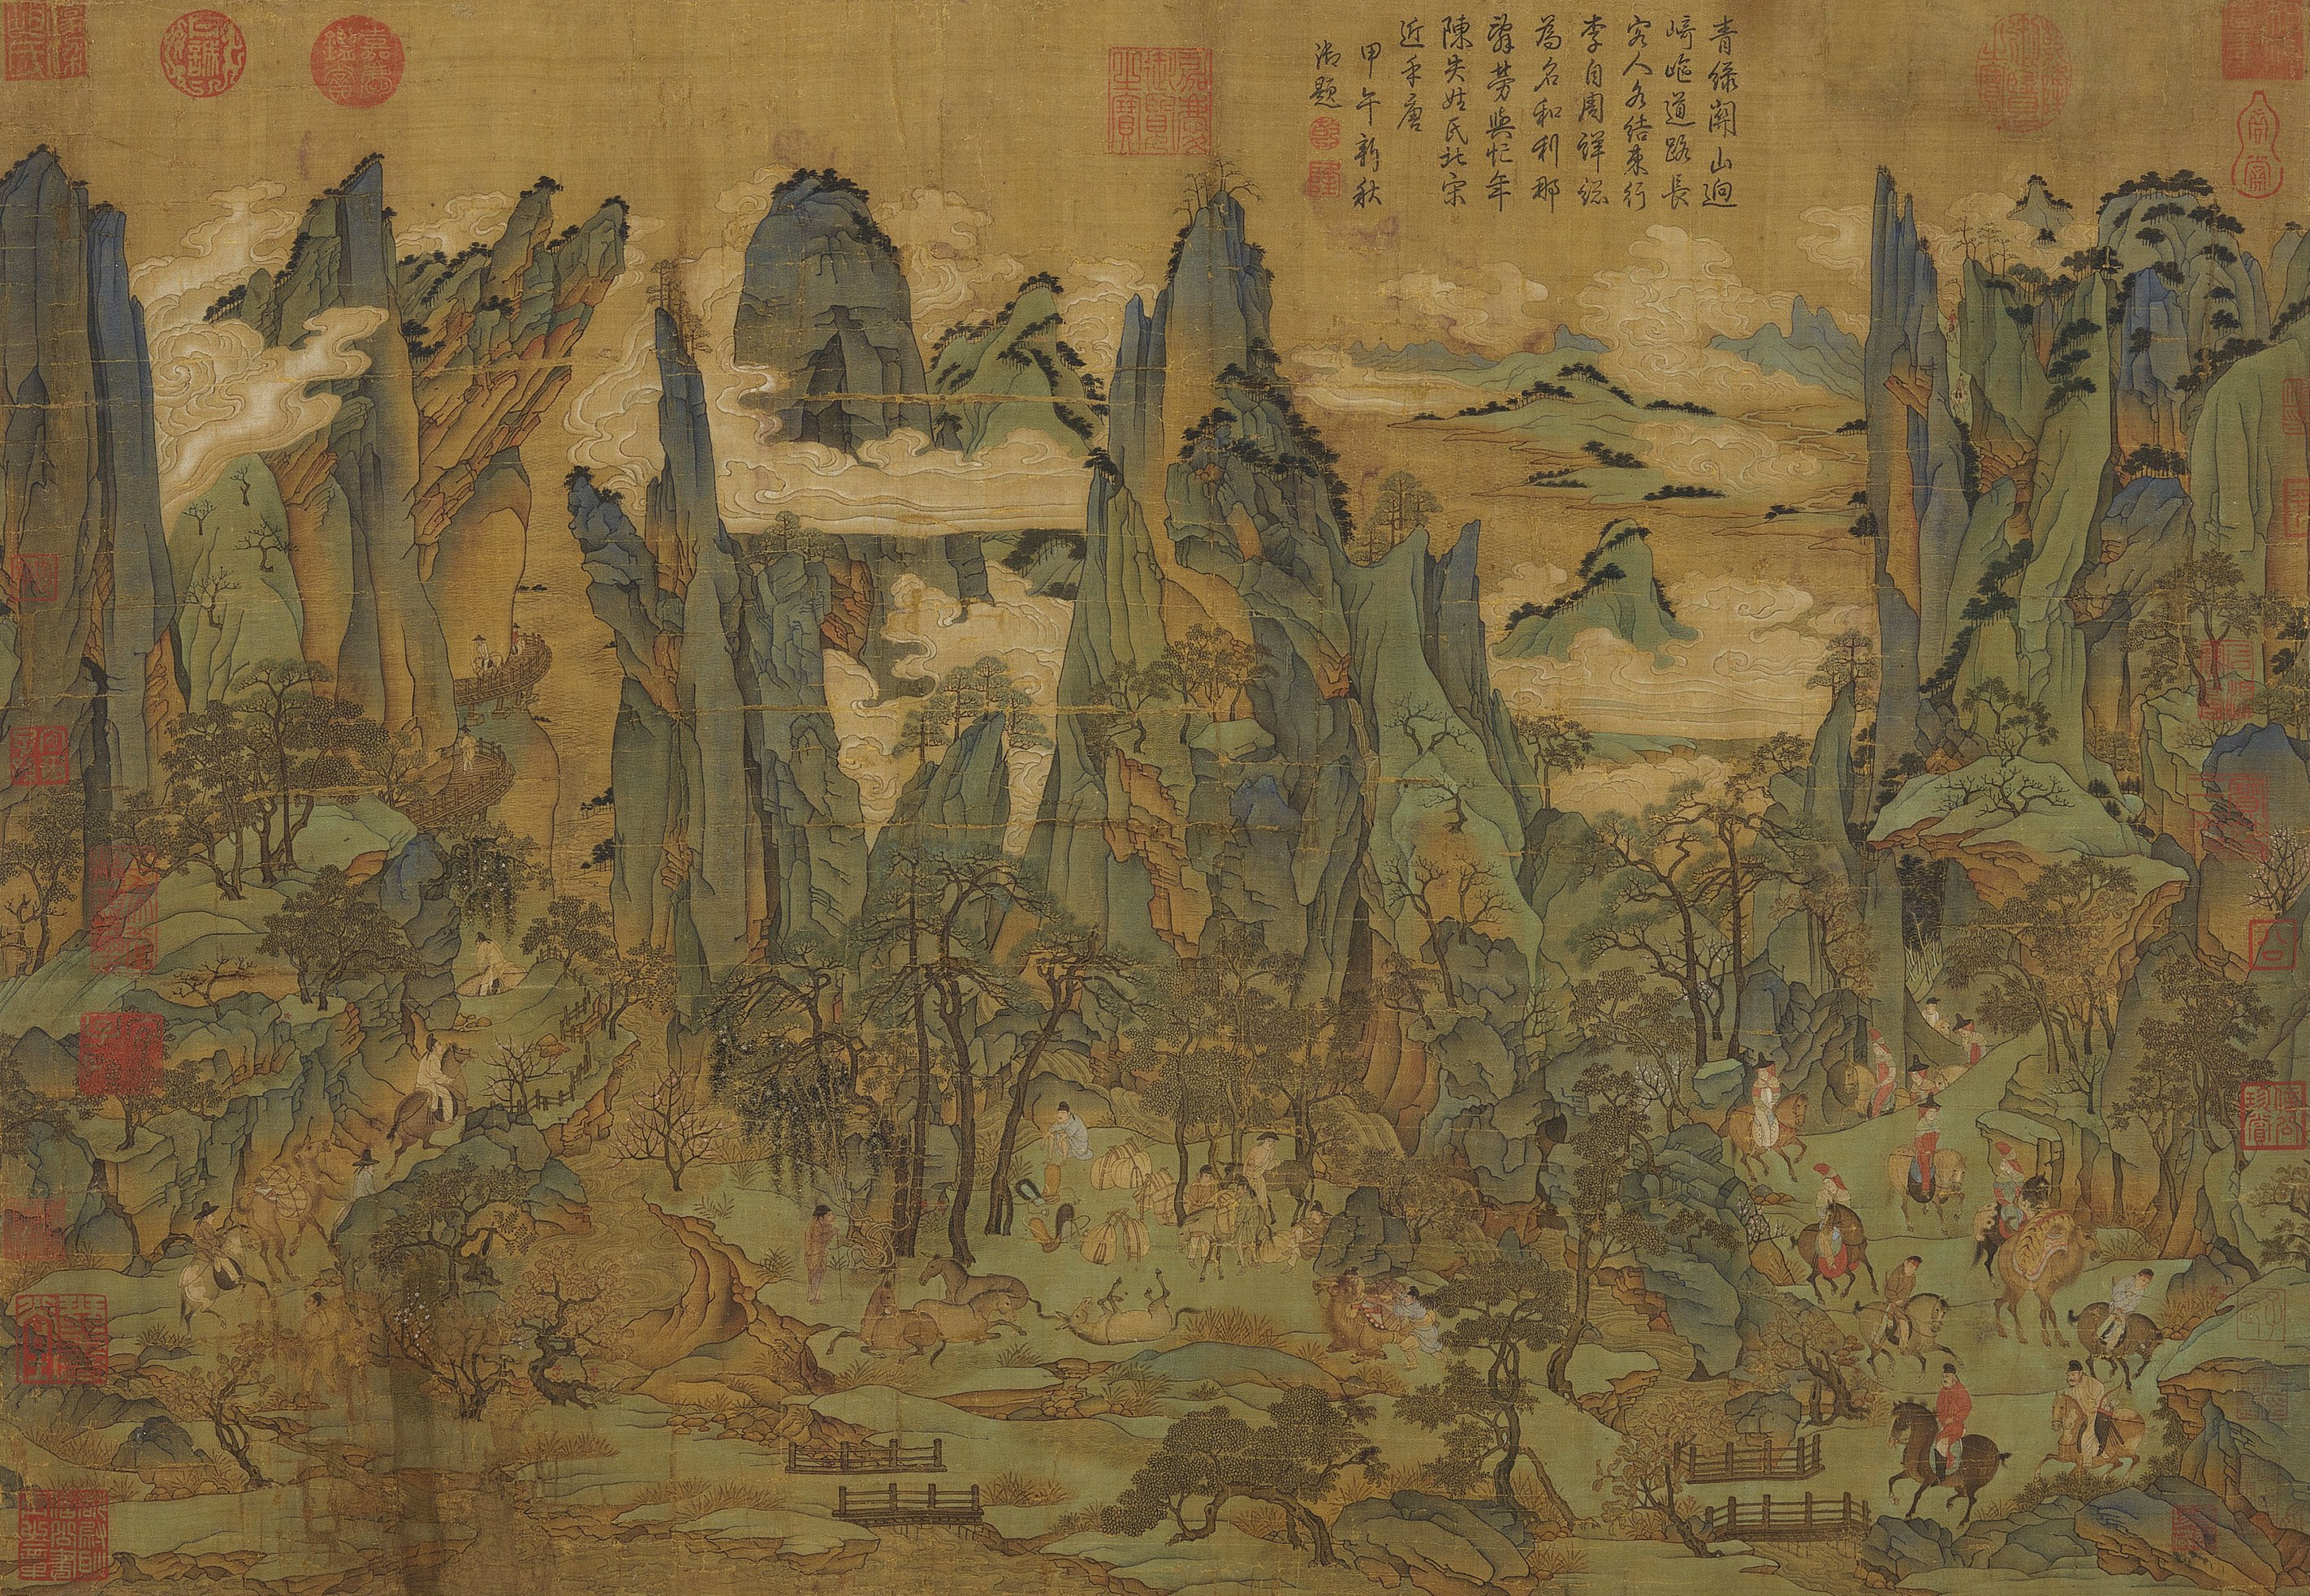 Painting of the Sui and Tang Dynasties | ChinesePaintings.net